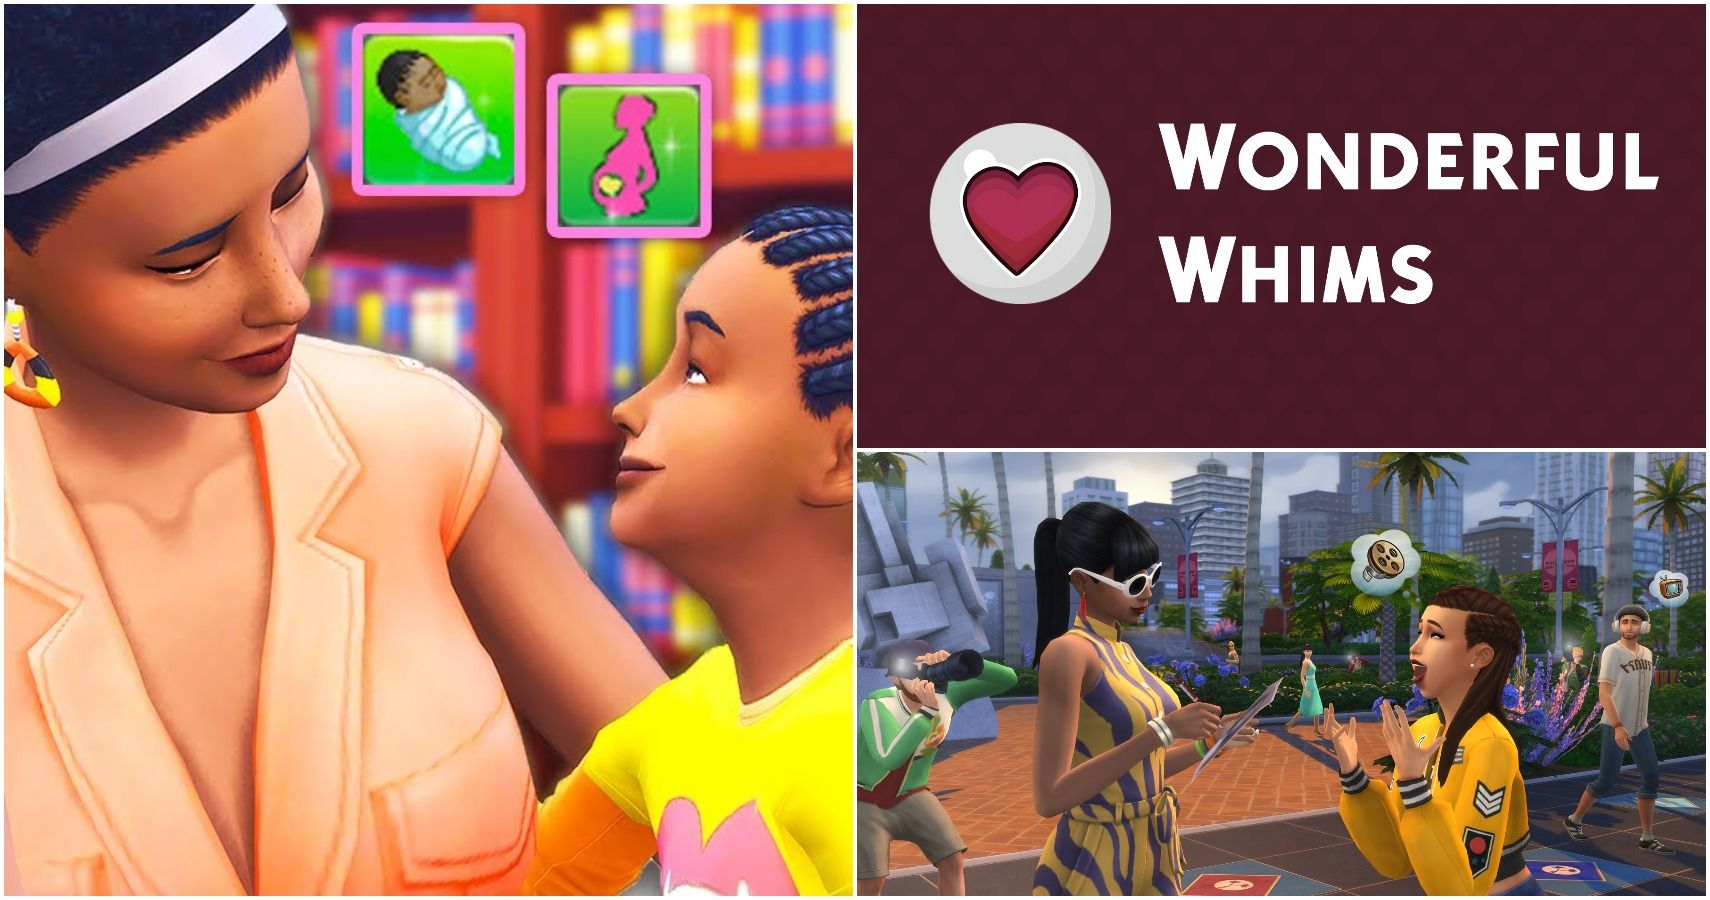 ashley wilbon add sims 4 wicked whims abortion photo